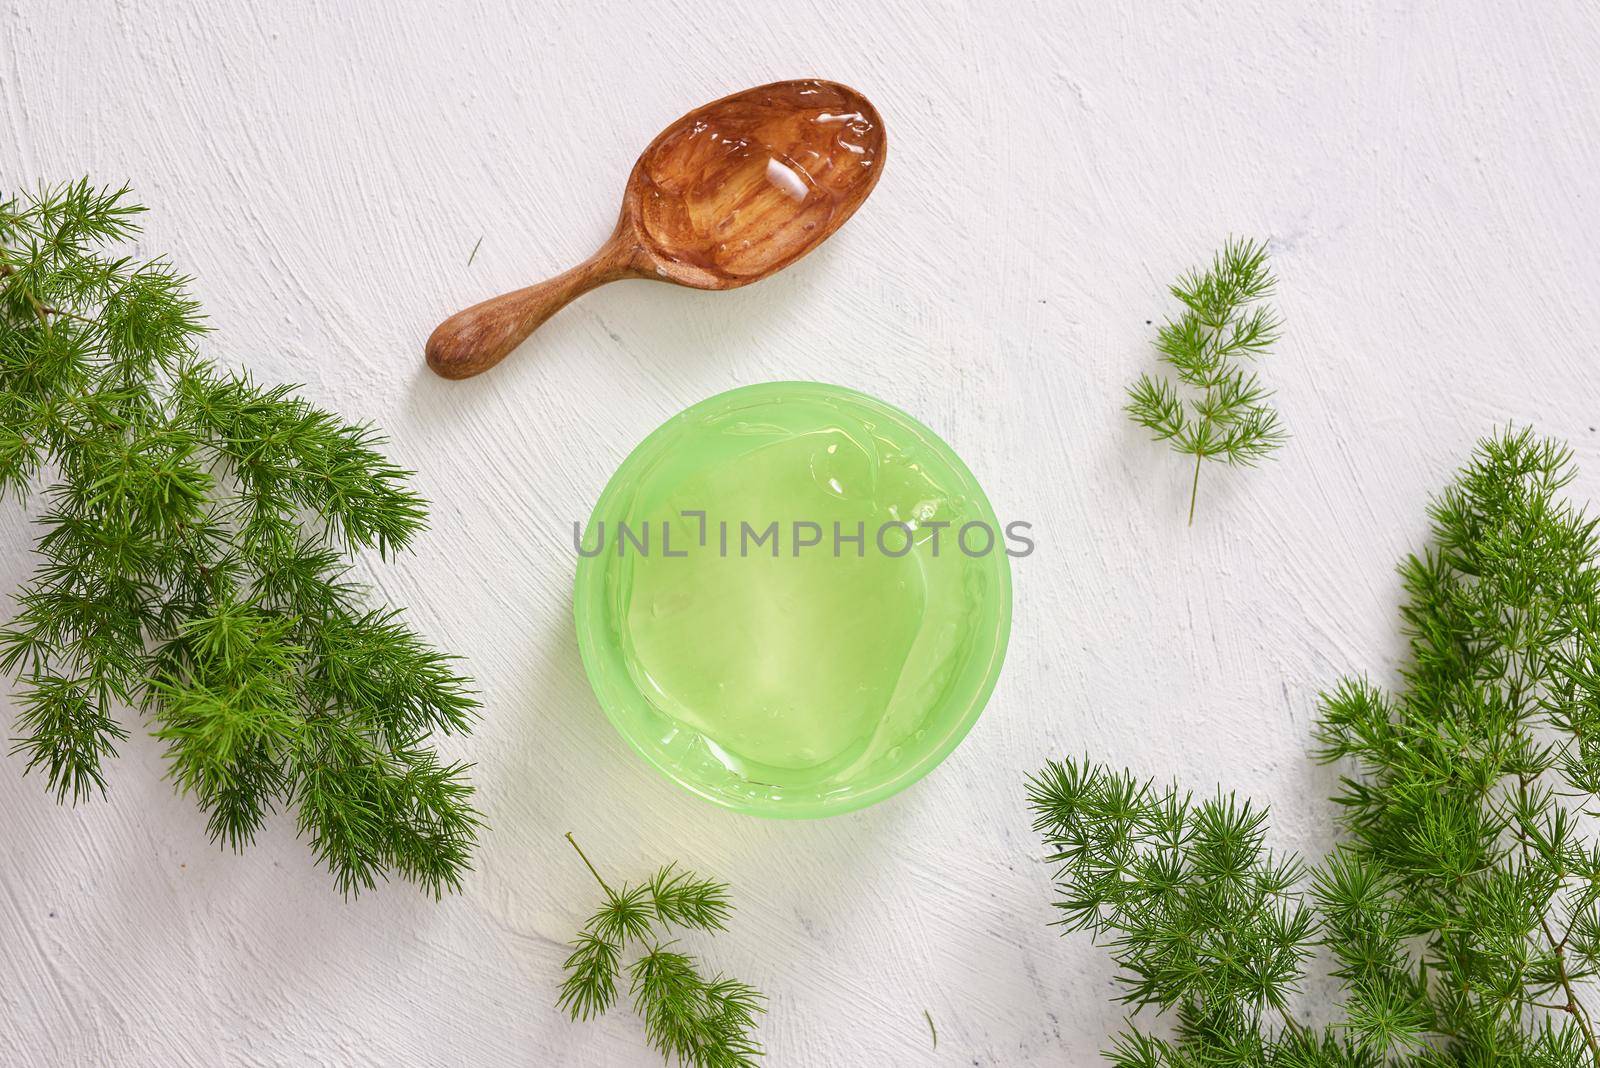 cosmetic creams with leaves on white wooden table background by makidotvn